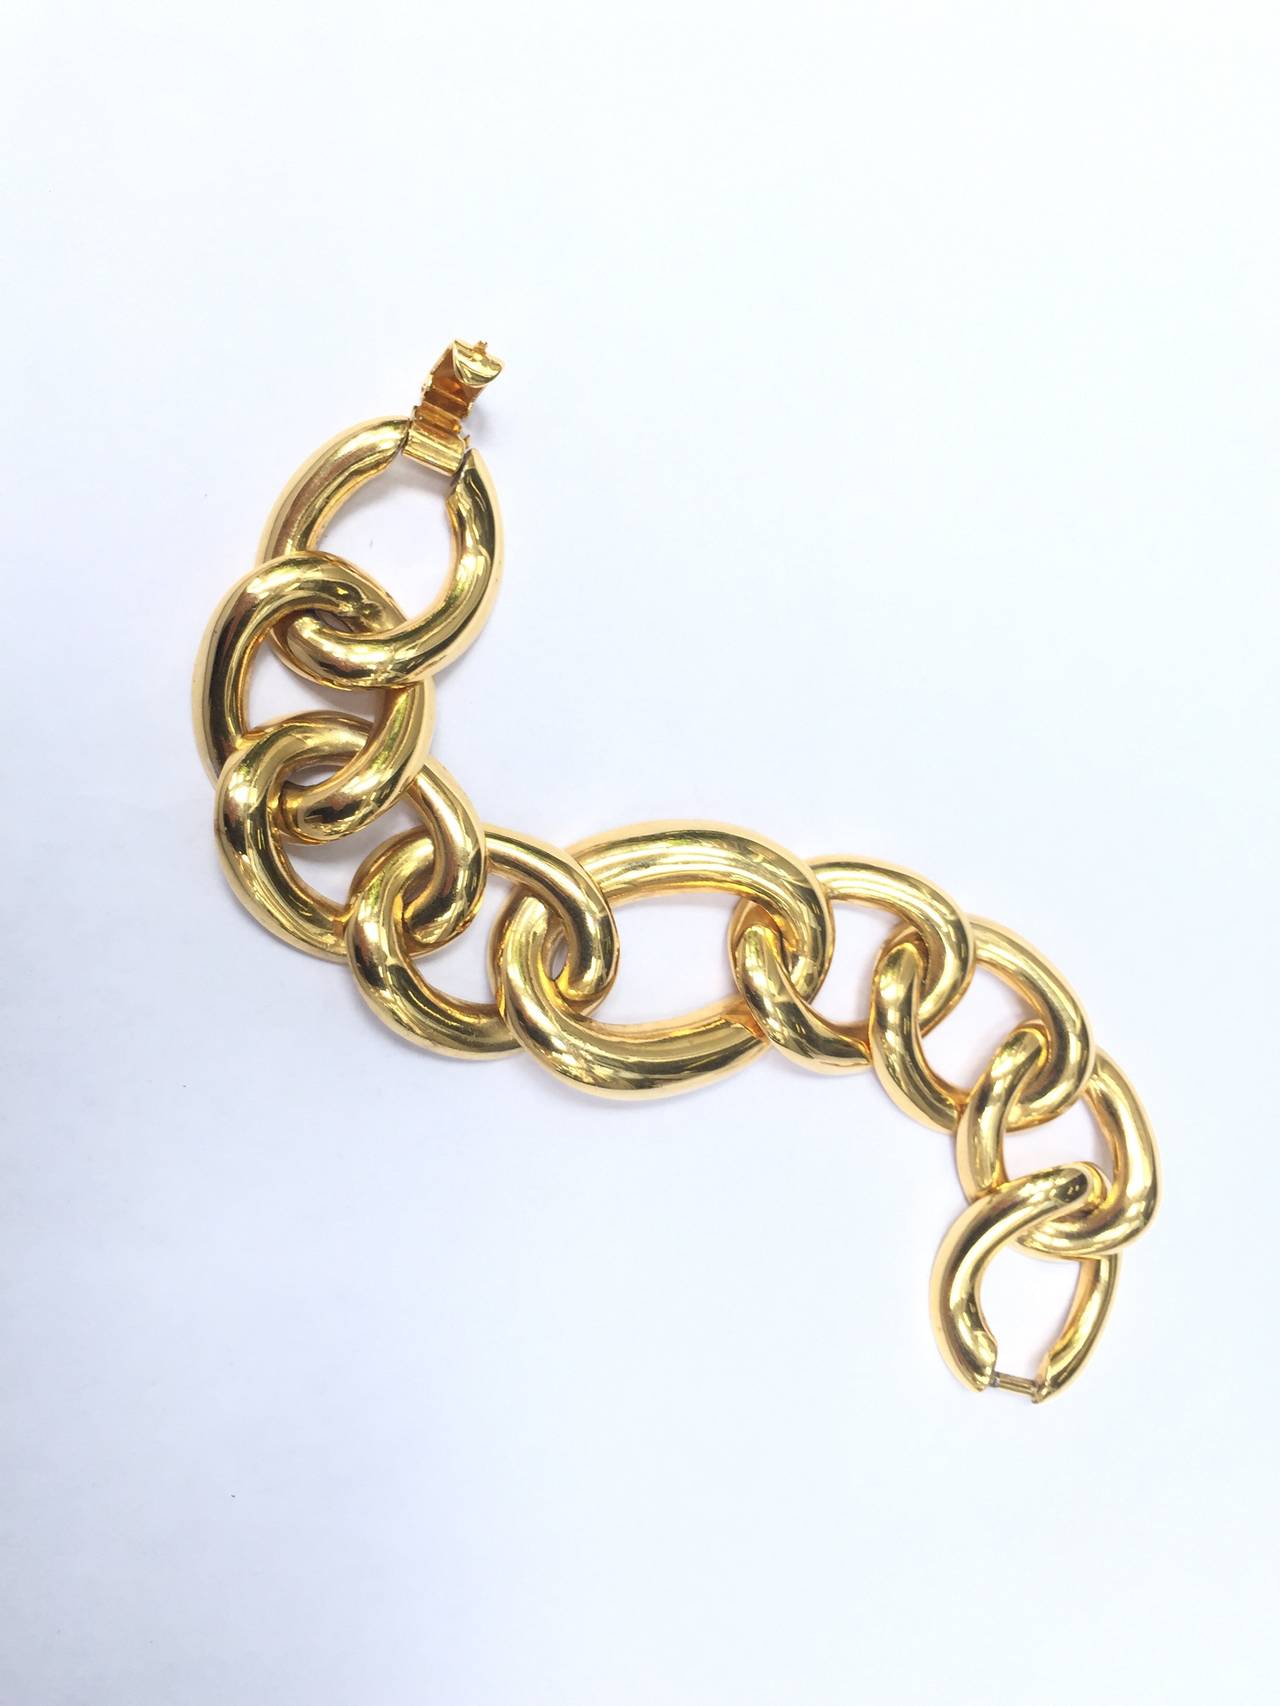 Alexis Kirk 1980s gold chain link bracelet. There are 9 links to this bracelet.
This vintage treasure was given to my client by Ed Riley who worked for Alexis Kirk back in the 80s. Ed Riley also worked for Halston.
Measurements are:
7.3/4